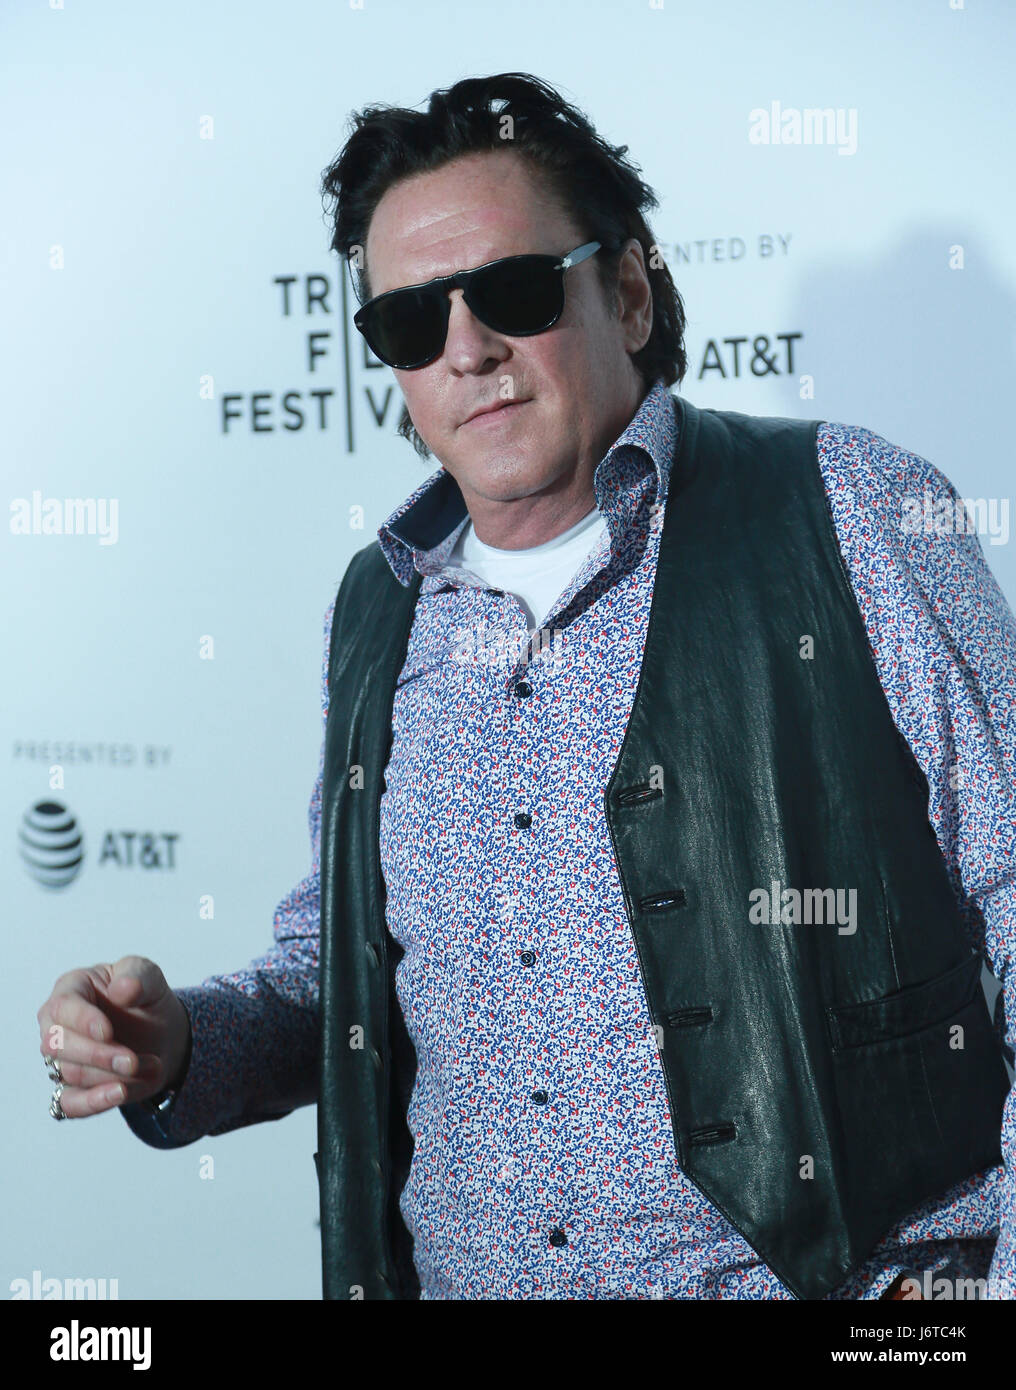 New York, NY USA - April 28, 2017: Michael Madsen attends the Reservoir Dogs Screening during 2017 Tribeca Film Festival at Beacon Theatre Stock Photo